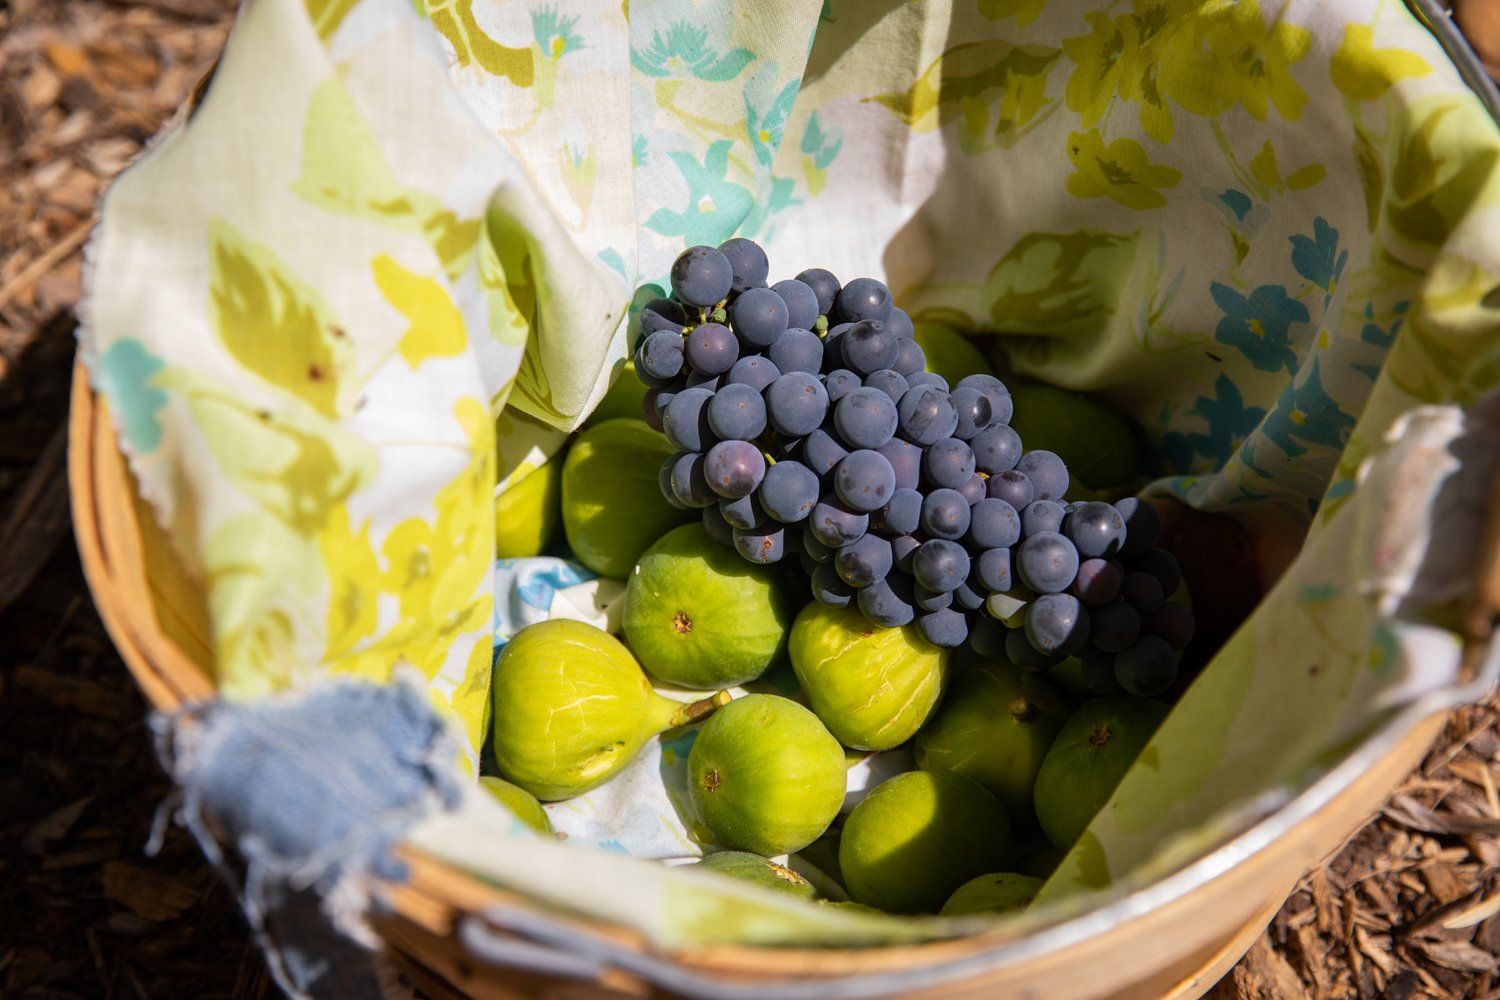 Freshly Picked Figs and Grapes from Aloha Food Forest Image